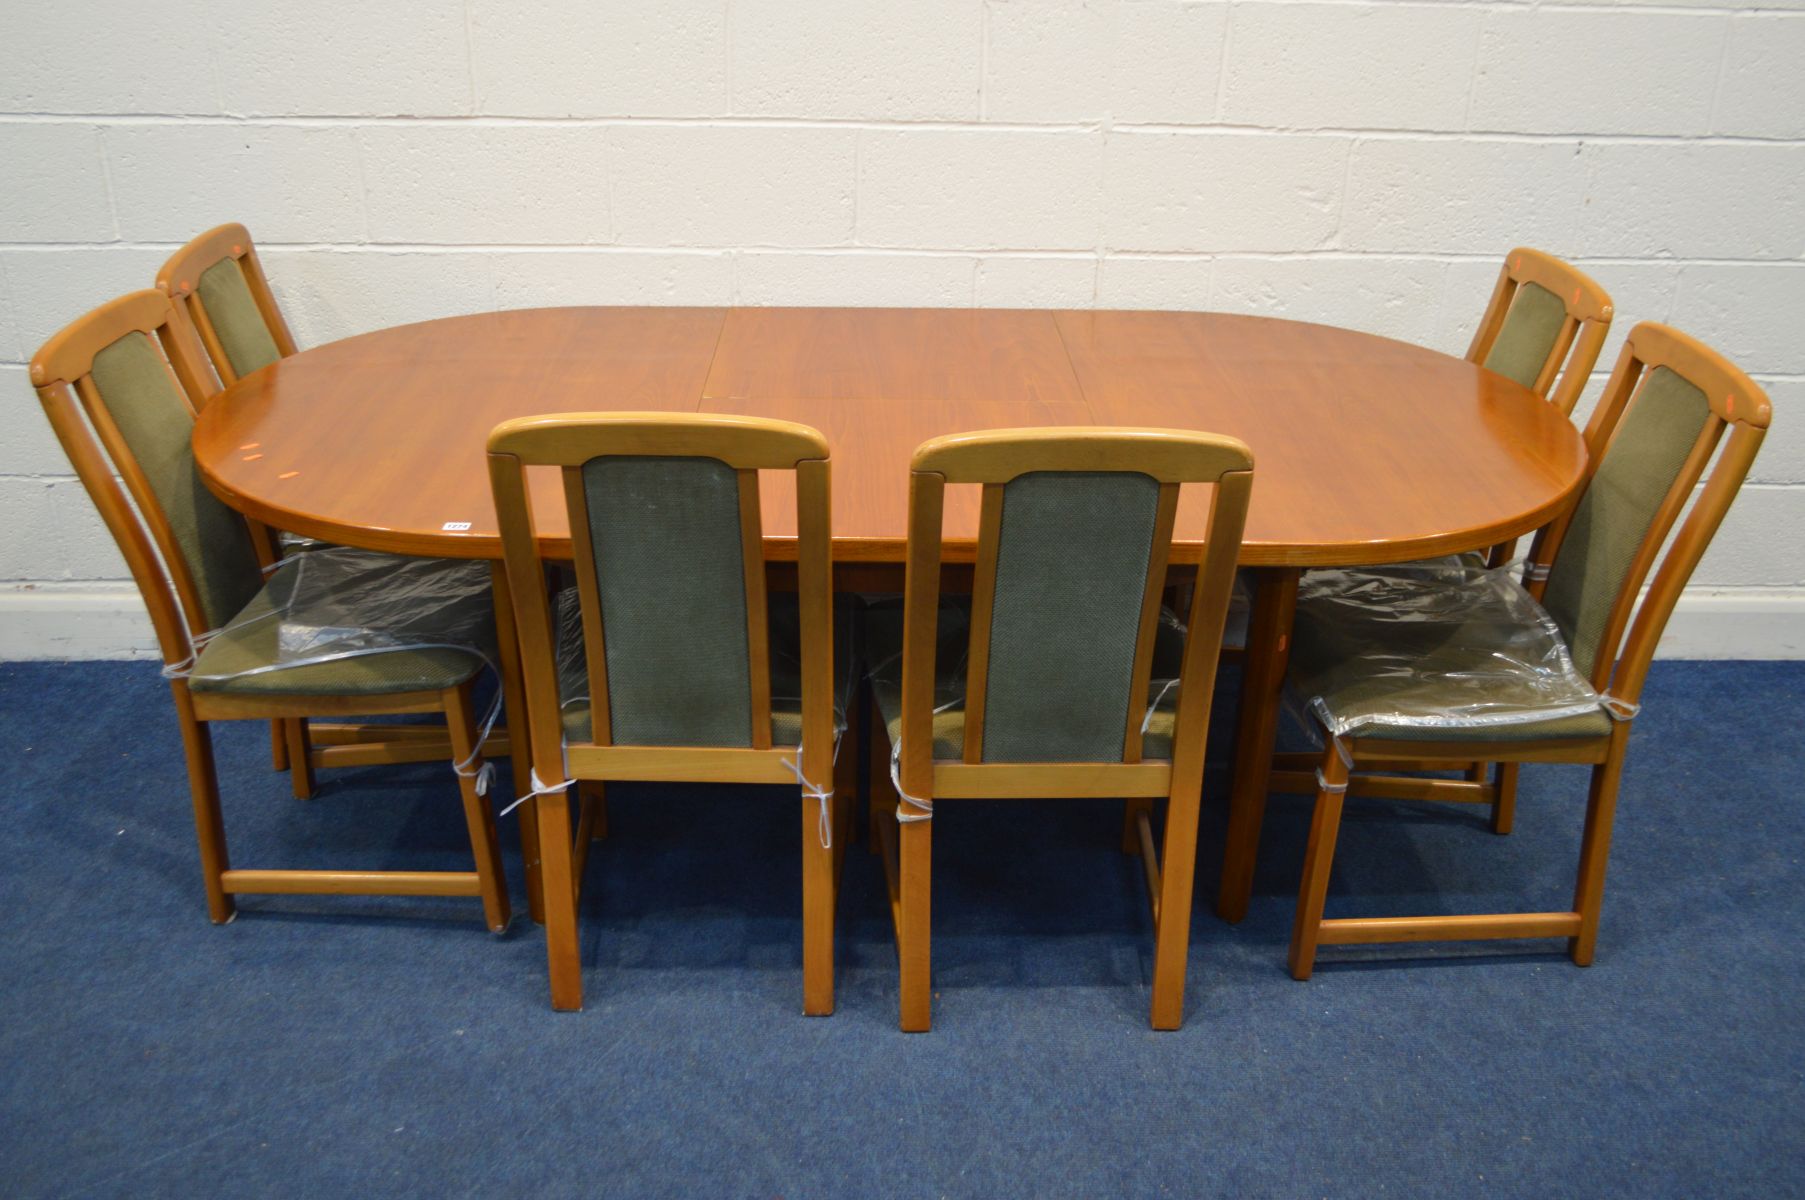 A 1980'S TEAK EXTENDING DINING TABLE, with one additional leaf, extended length 211cm x closed 151cm